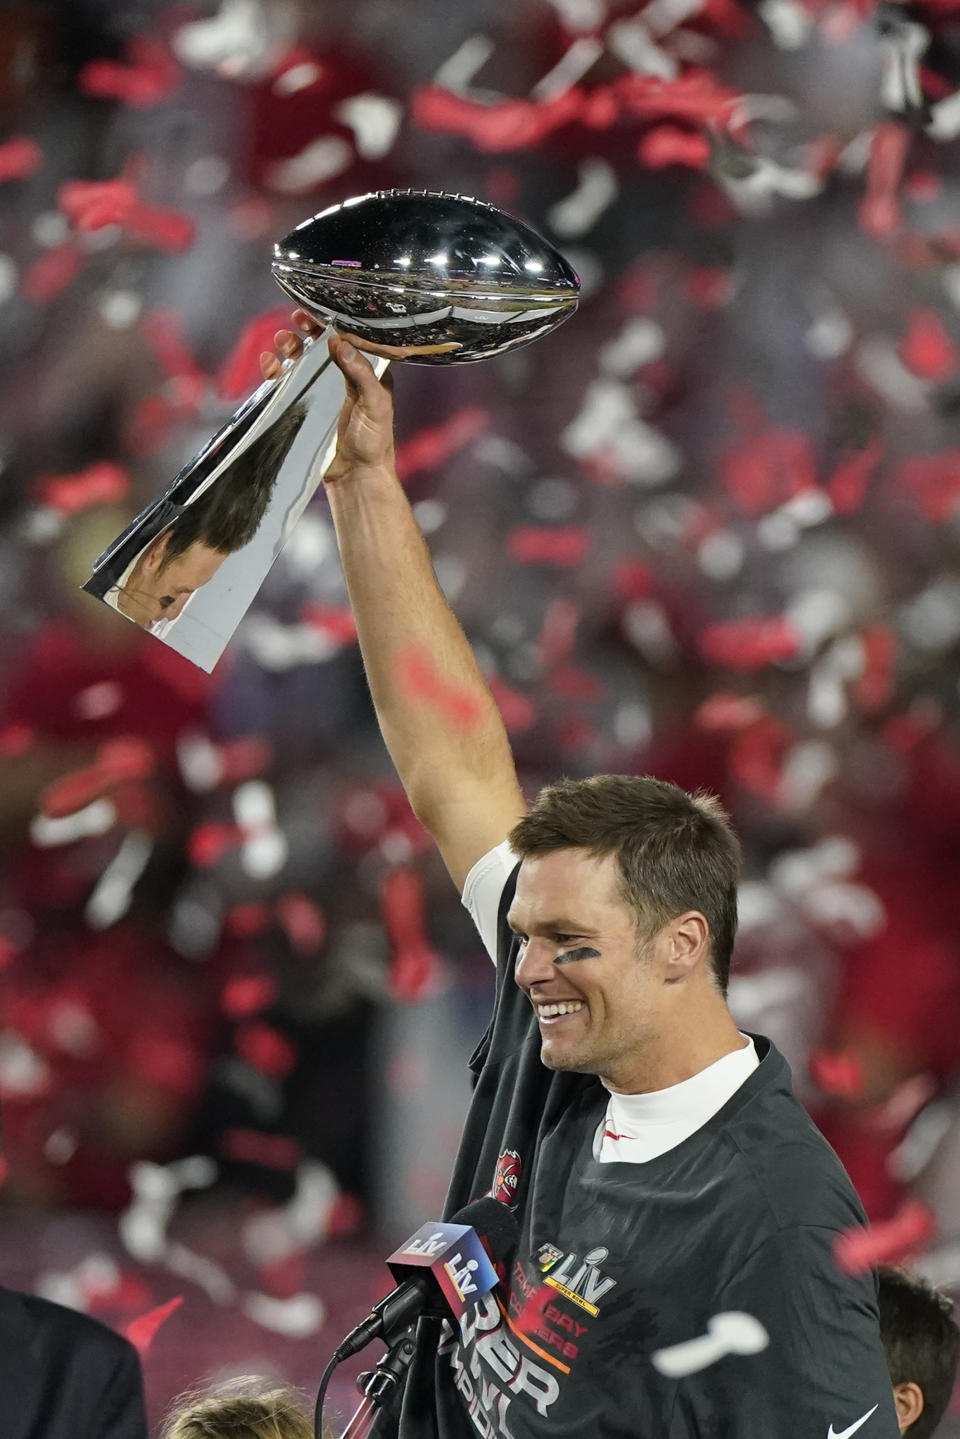 FILE - Tampa Bay Buccaneers quarterback Tom Brady celebrates with the Vince Lombardi Trophy after the NFL Super Bowl 55 football game against the Kansas City Chiefs on Feb. 7, 2021, in Tampa, Fla. The Buccaneers defeated the Chiefs 31-9 to win the Super Bowl. (AP Photo/Gregory Bull, File)